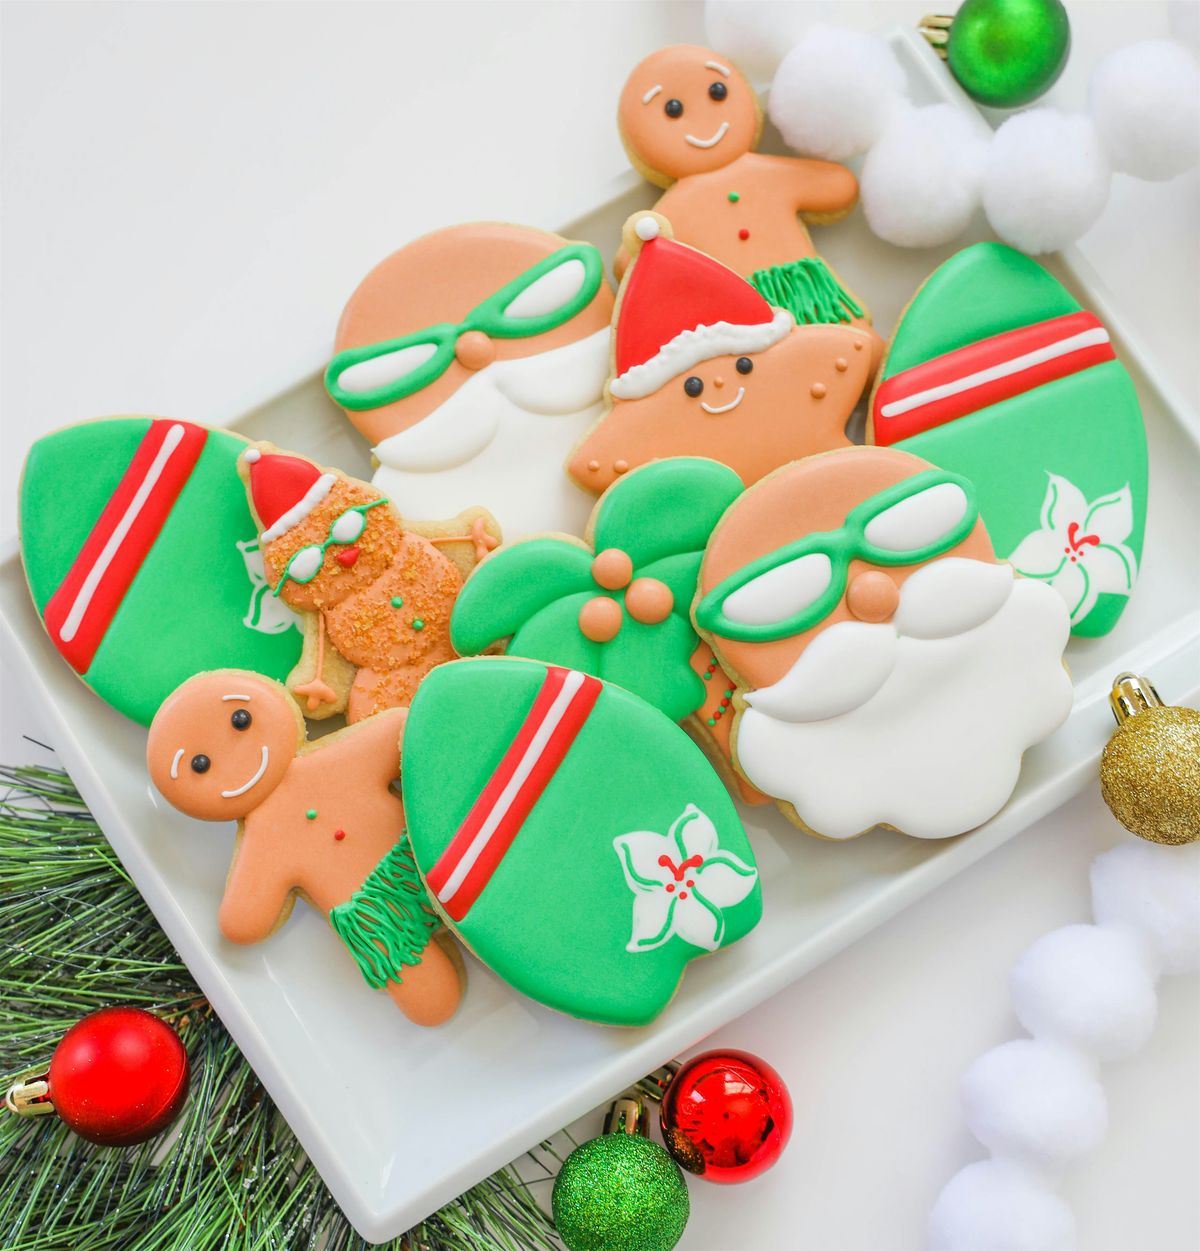 Surfs up! It\u2019s Christmas in July Cookie Decorating Class! 1:30pm